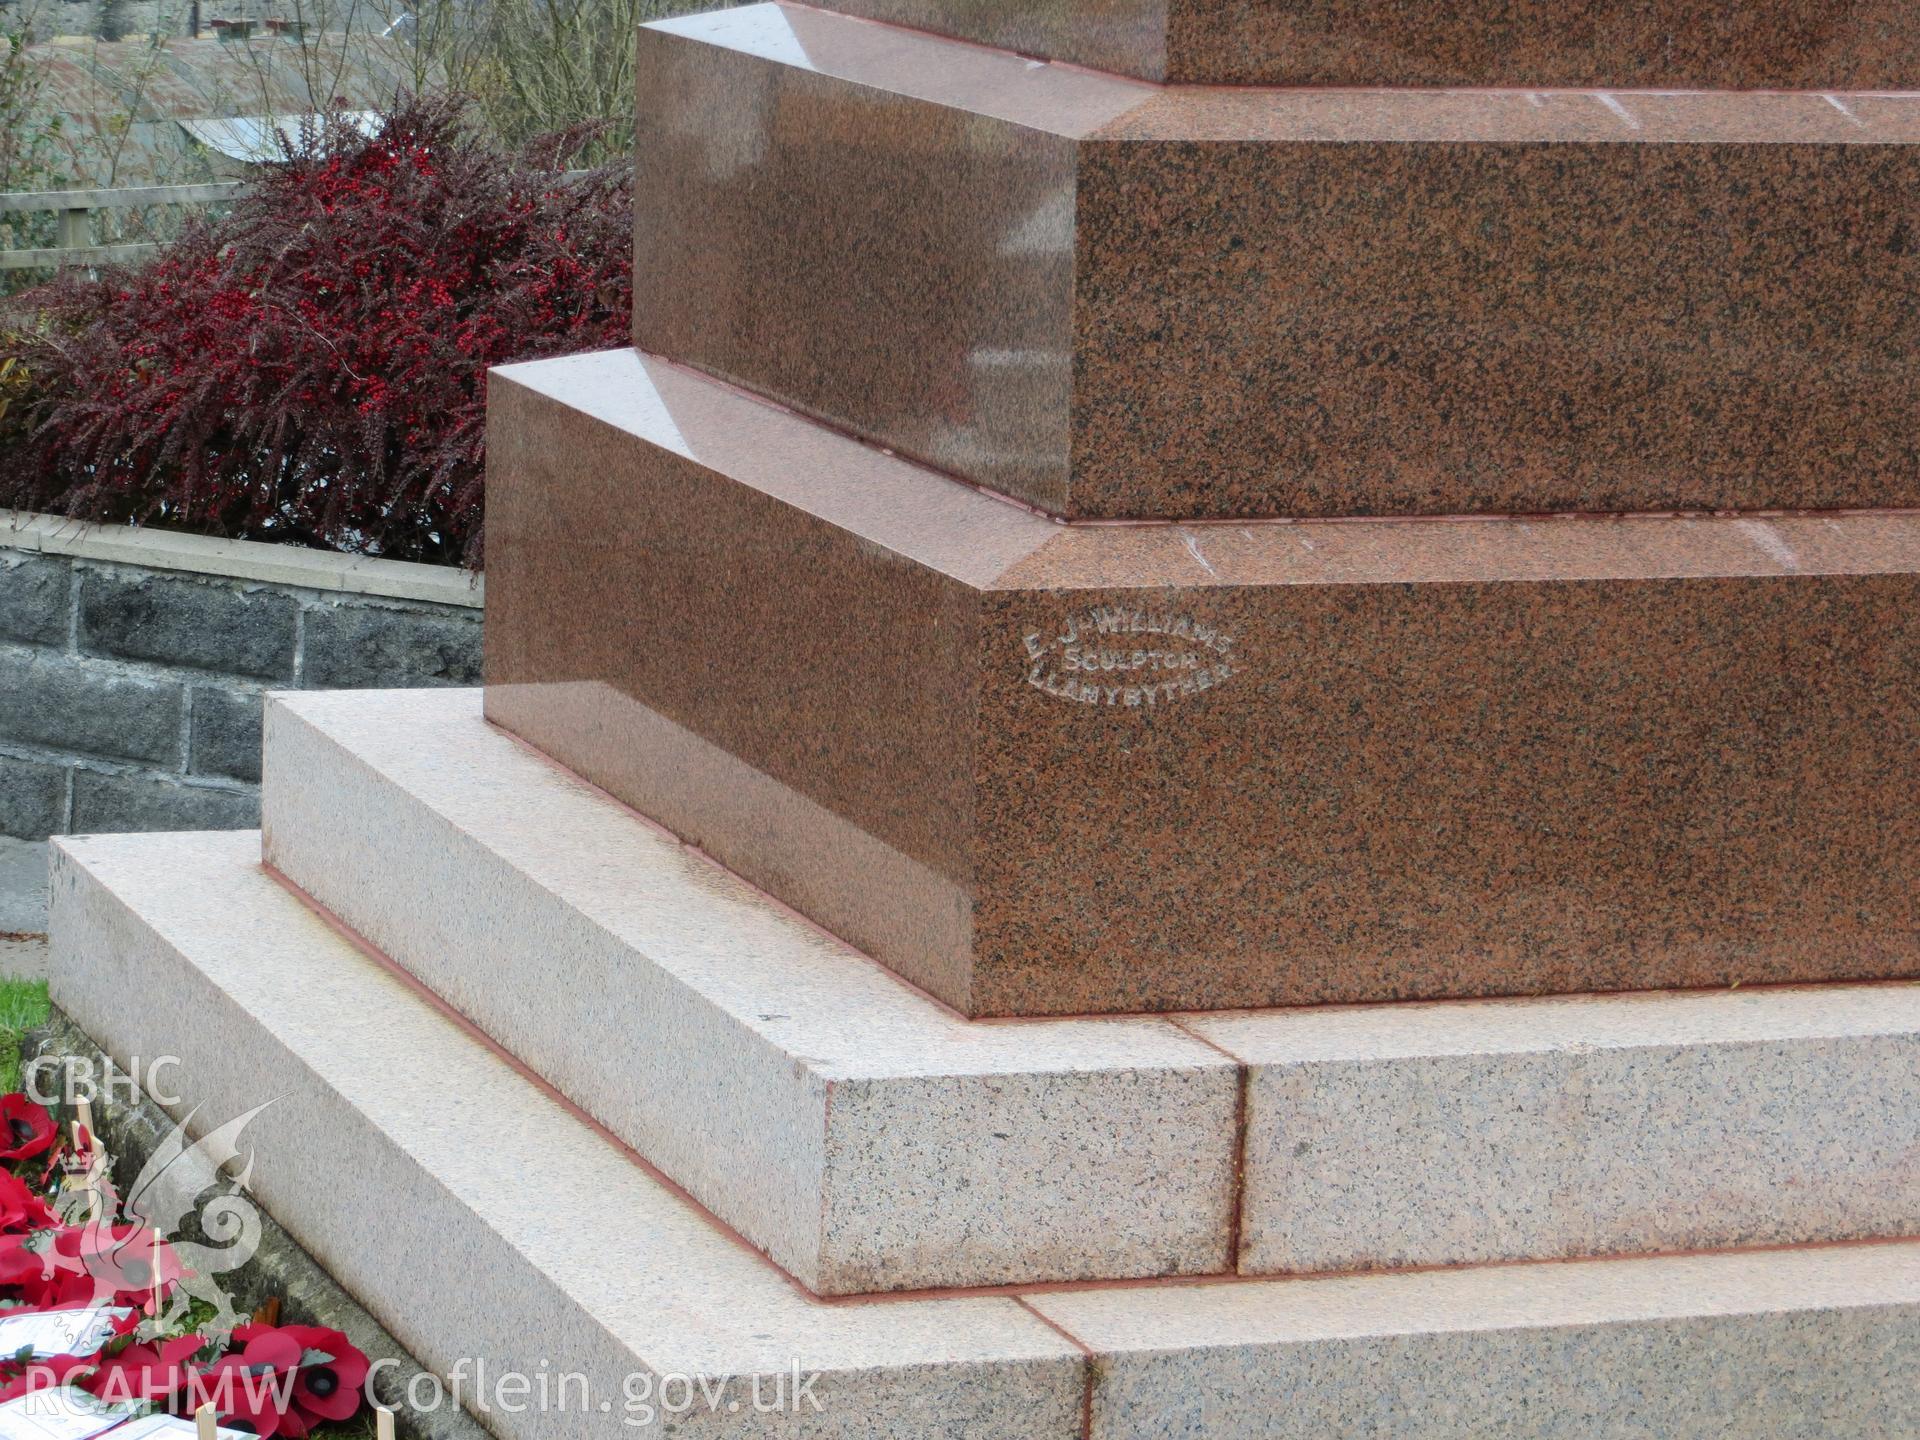 Detail of base and lower plinth.